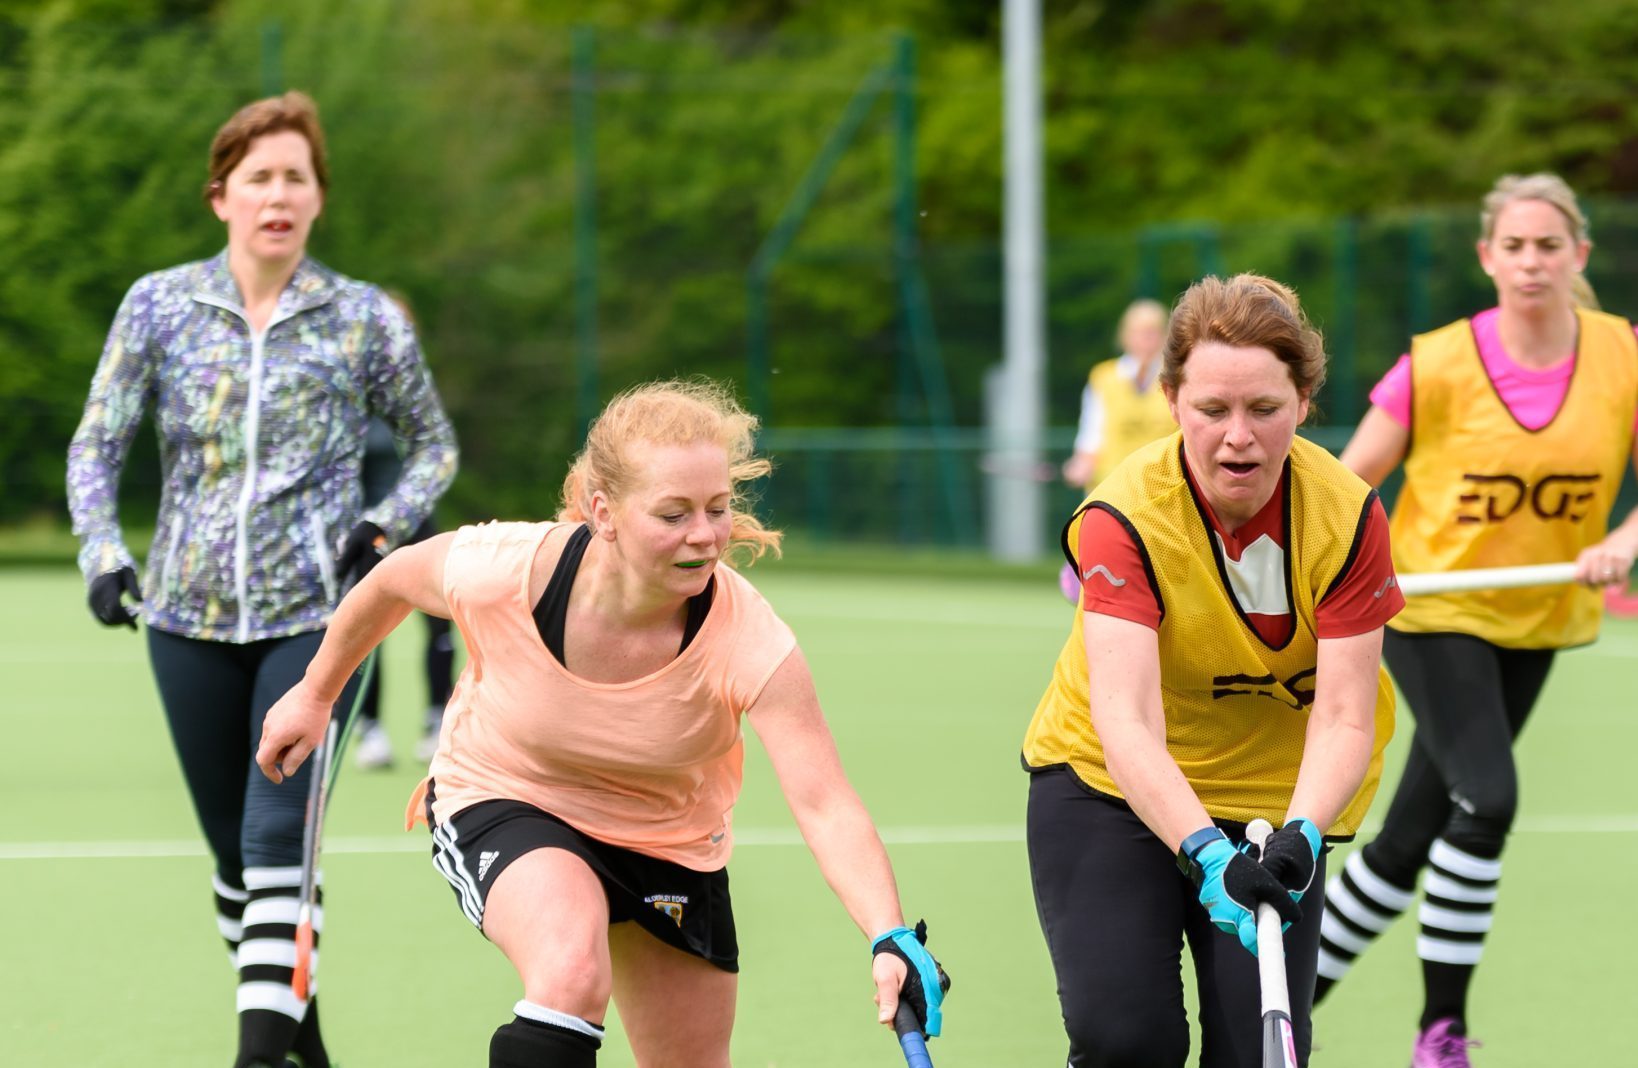 A group of women aged 40-50 playing hockey